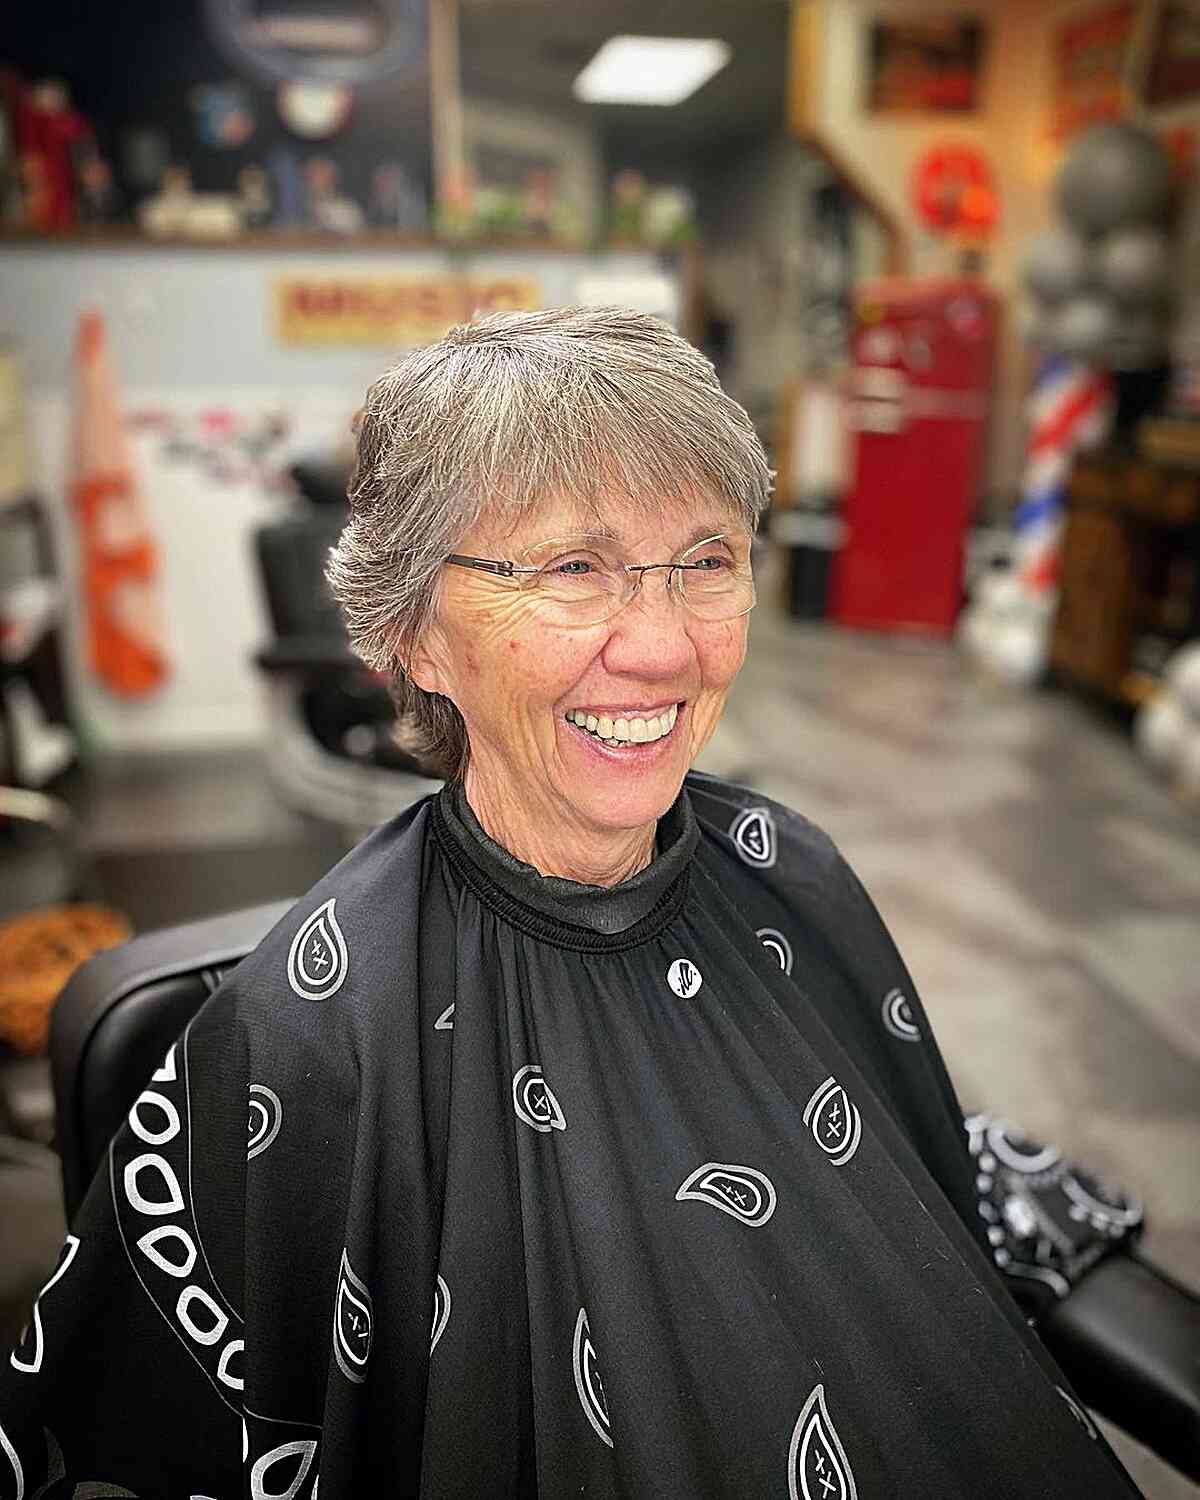 Short Shaggy Grey Pixie with Choppy Bangs on Women Over 70 with Glasses